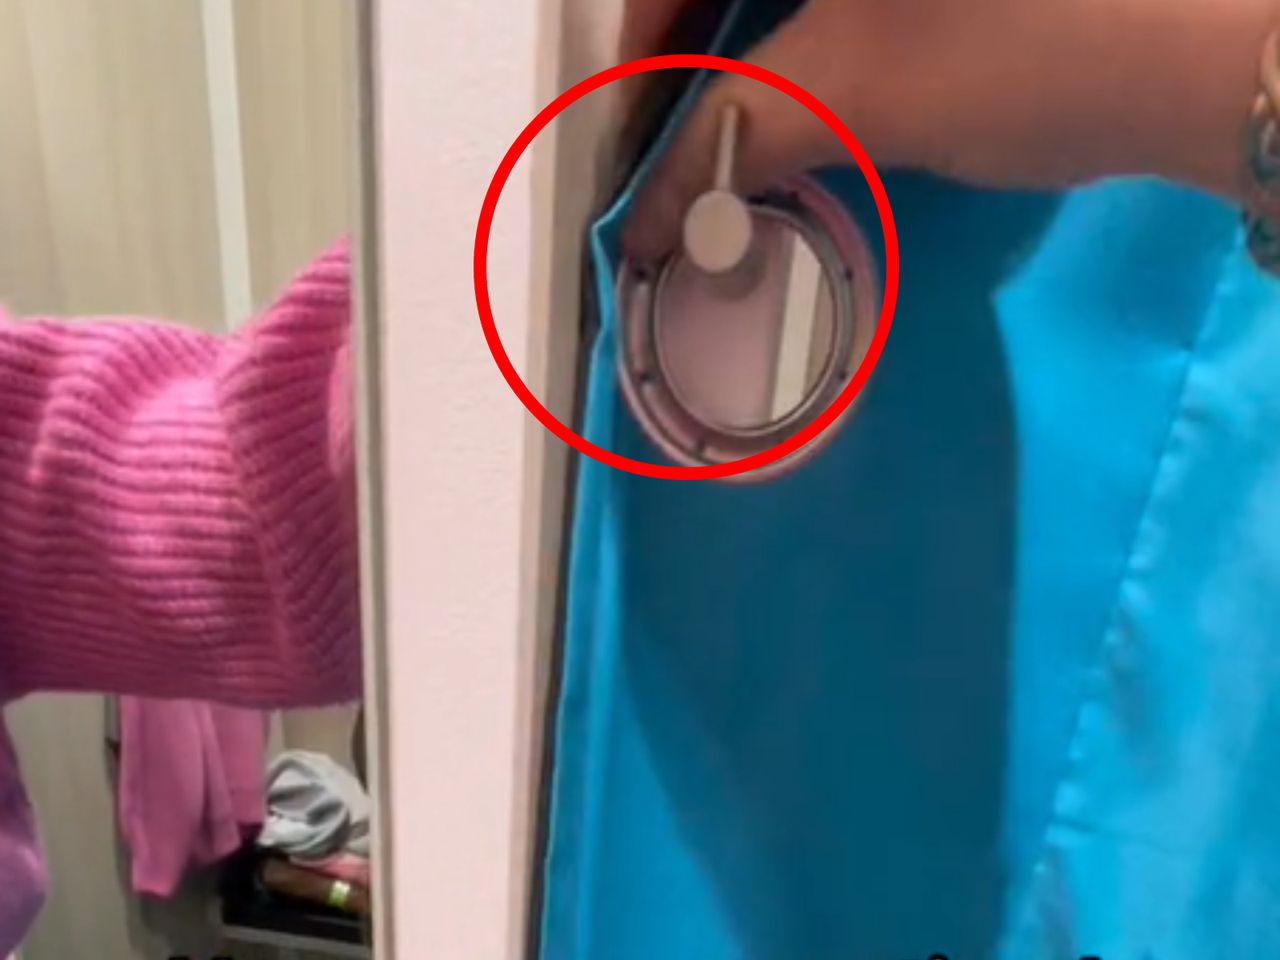 Spotted a hook in the fitting room? Grab it right away